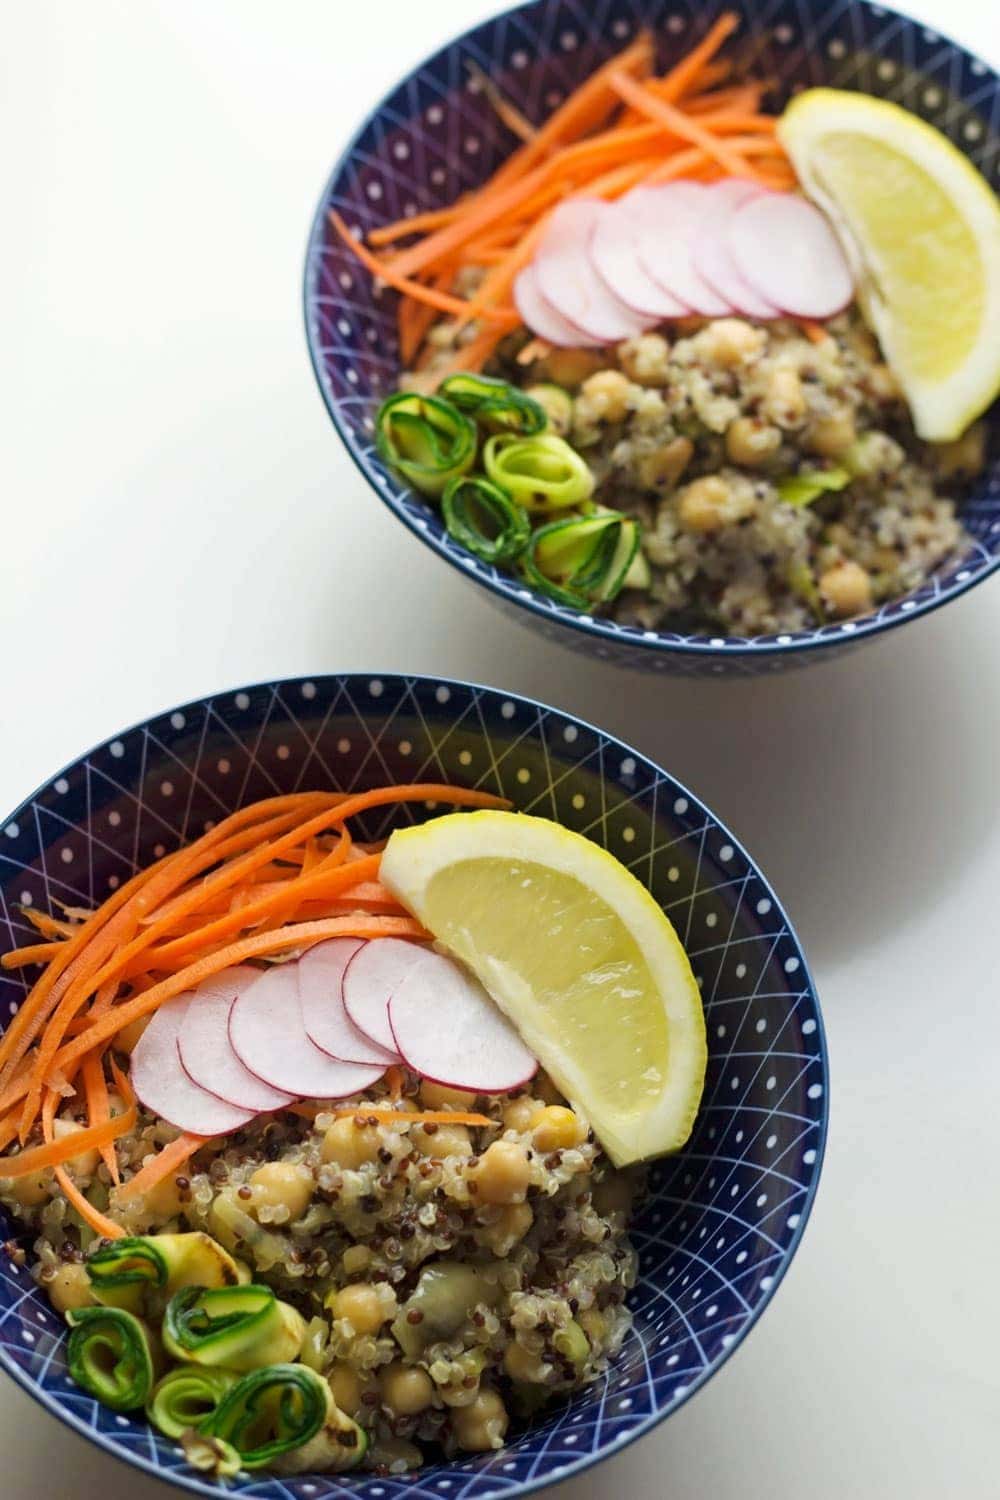 These protein-packed veggie quinoa bowls will keep you full for hours. Look no further for a super healthy vegetarian dinner!